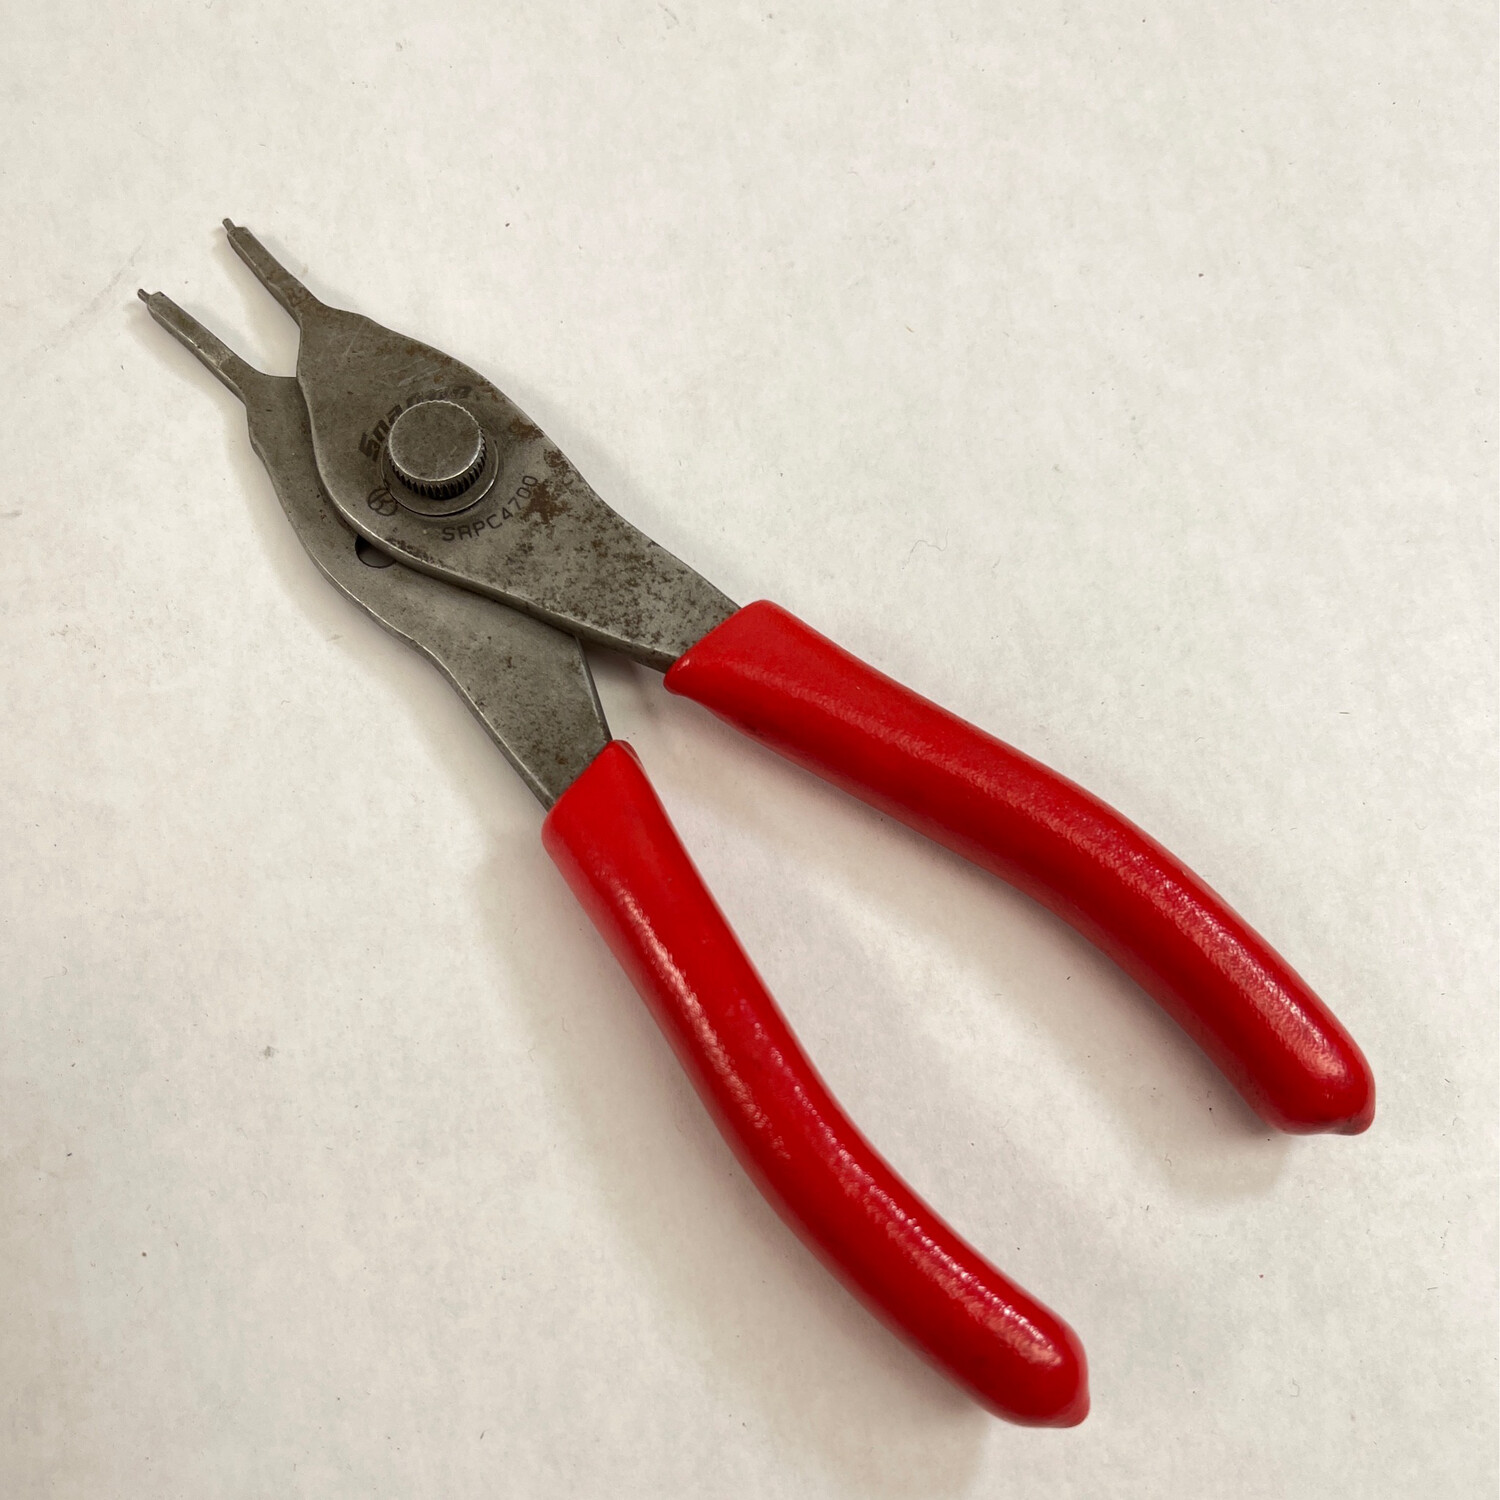 Snap On Convertible Retaining Ring Pliers, SRPC4700